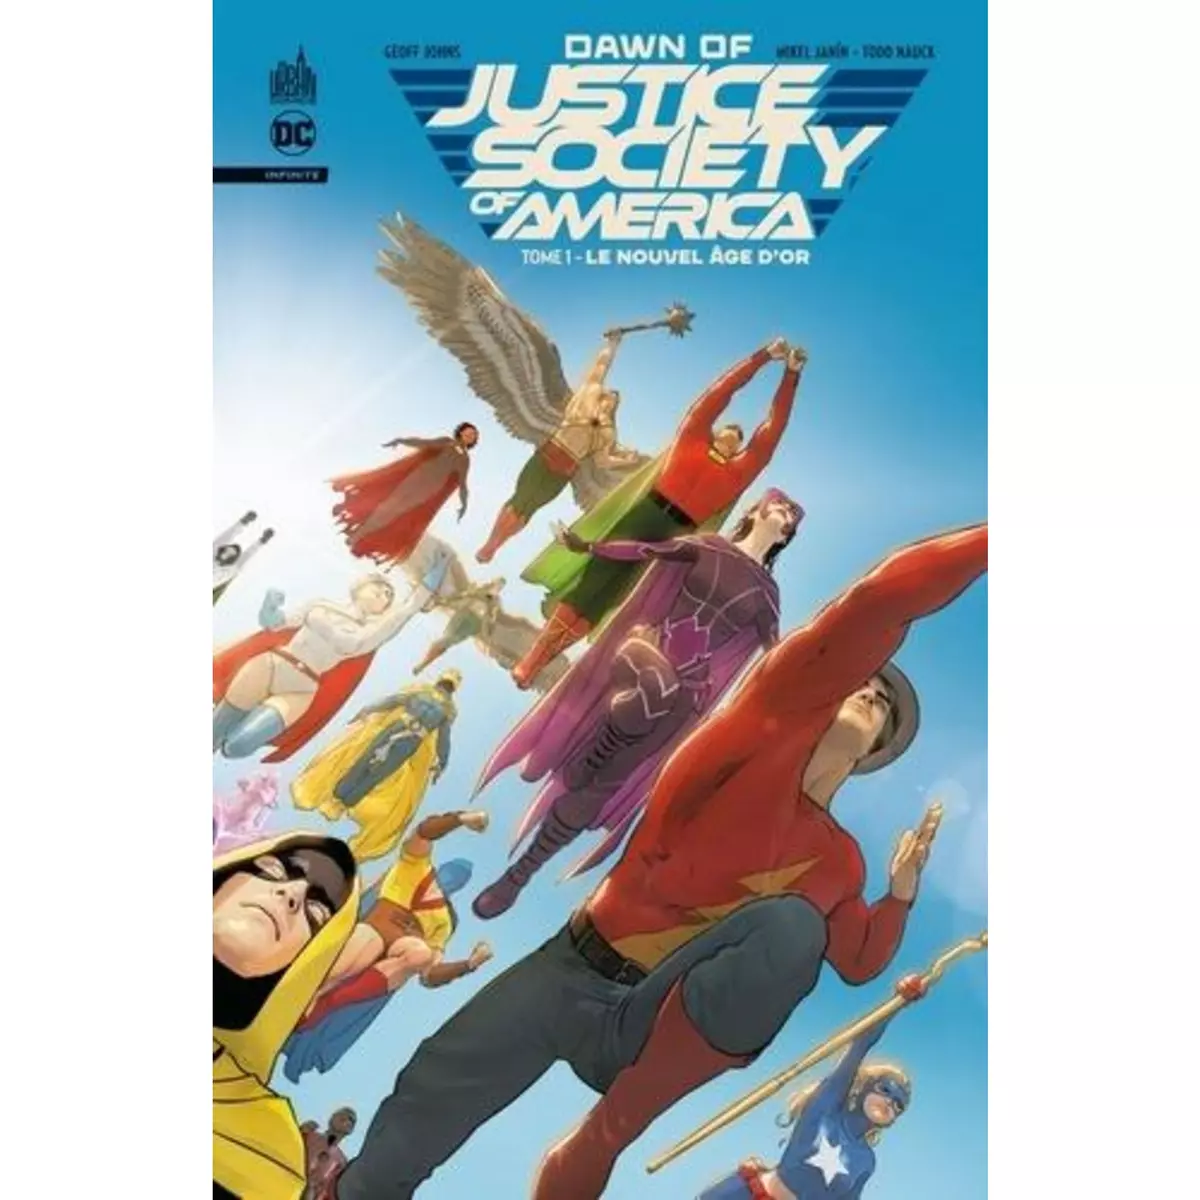  DAWN OF JUSTICE SOCIETY OF AMERICA TOME 1 : LE NOUVEL AGE D'OR, Johns Geoff